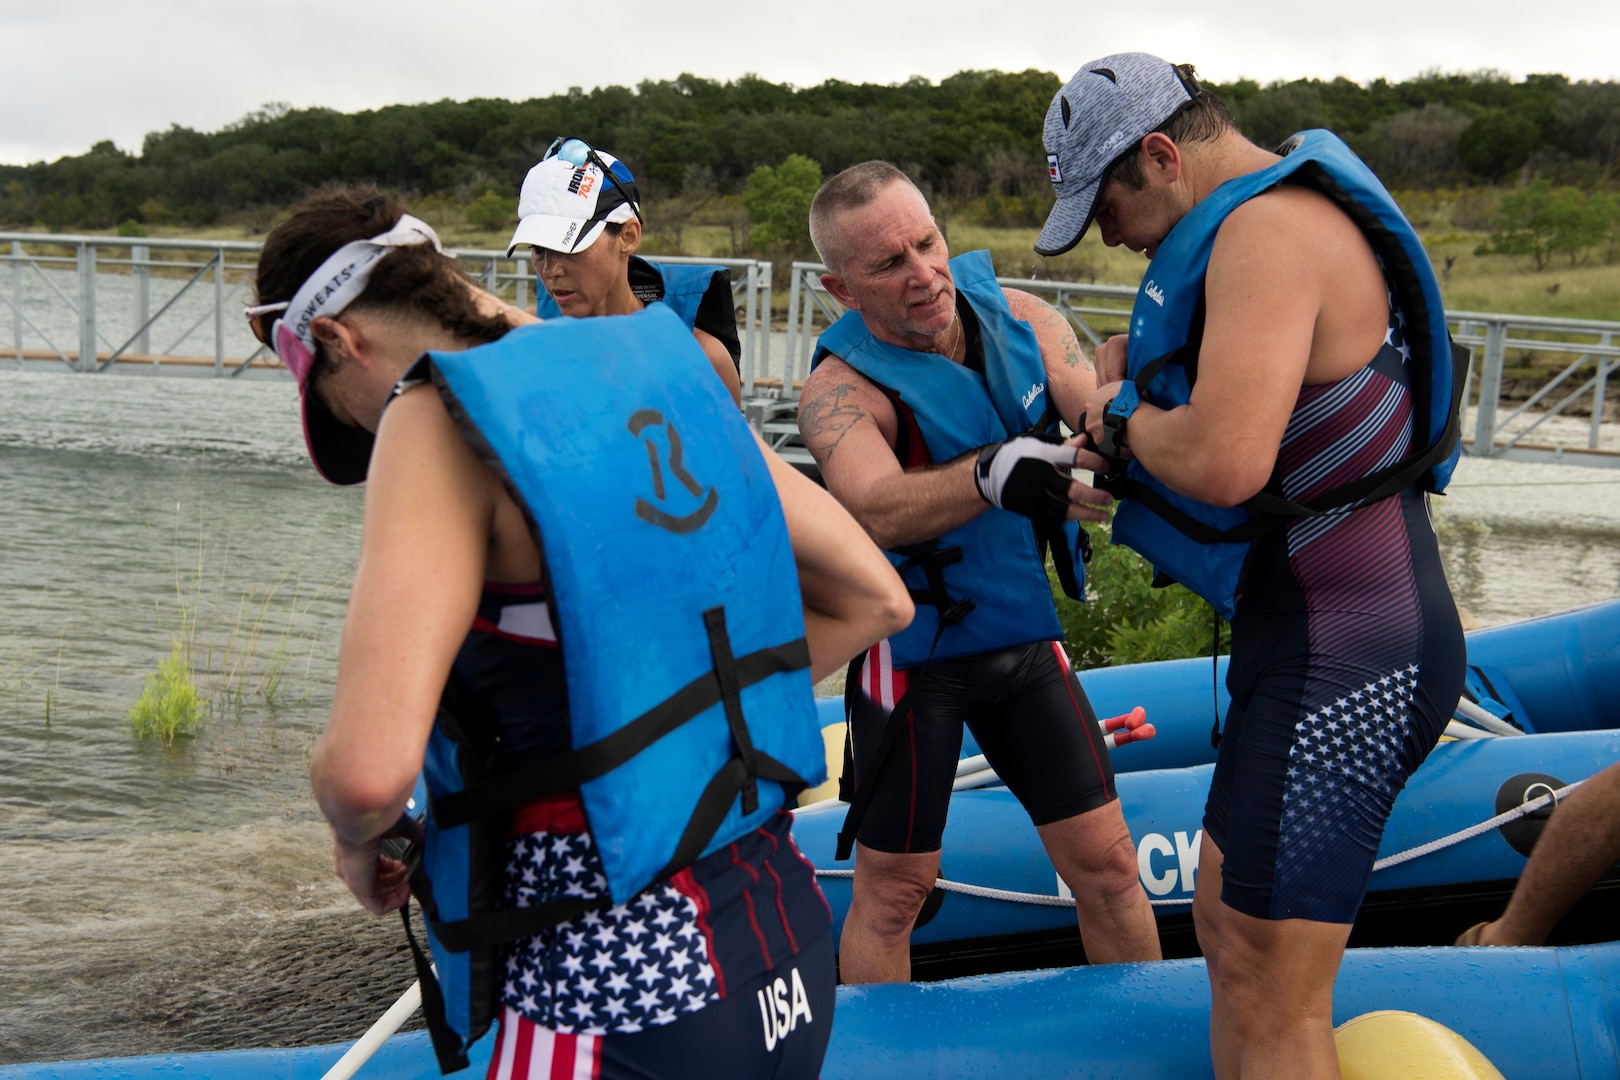 Members of Joint Base San Antonio prepare for the rafting portion of the Rambler 120 Oct. 13, 2018, at JBSA Recreation Area at Canyon Lake, Texas.